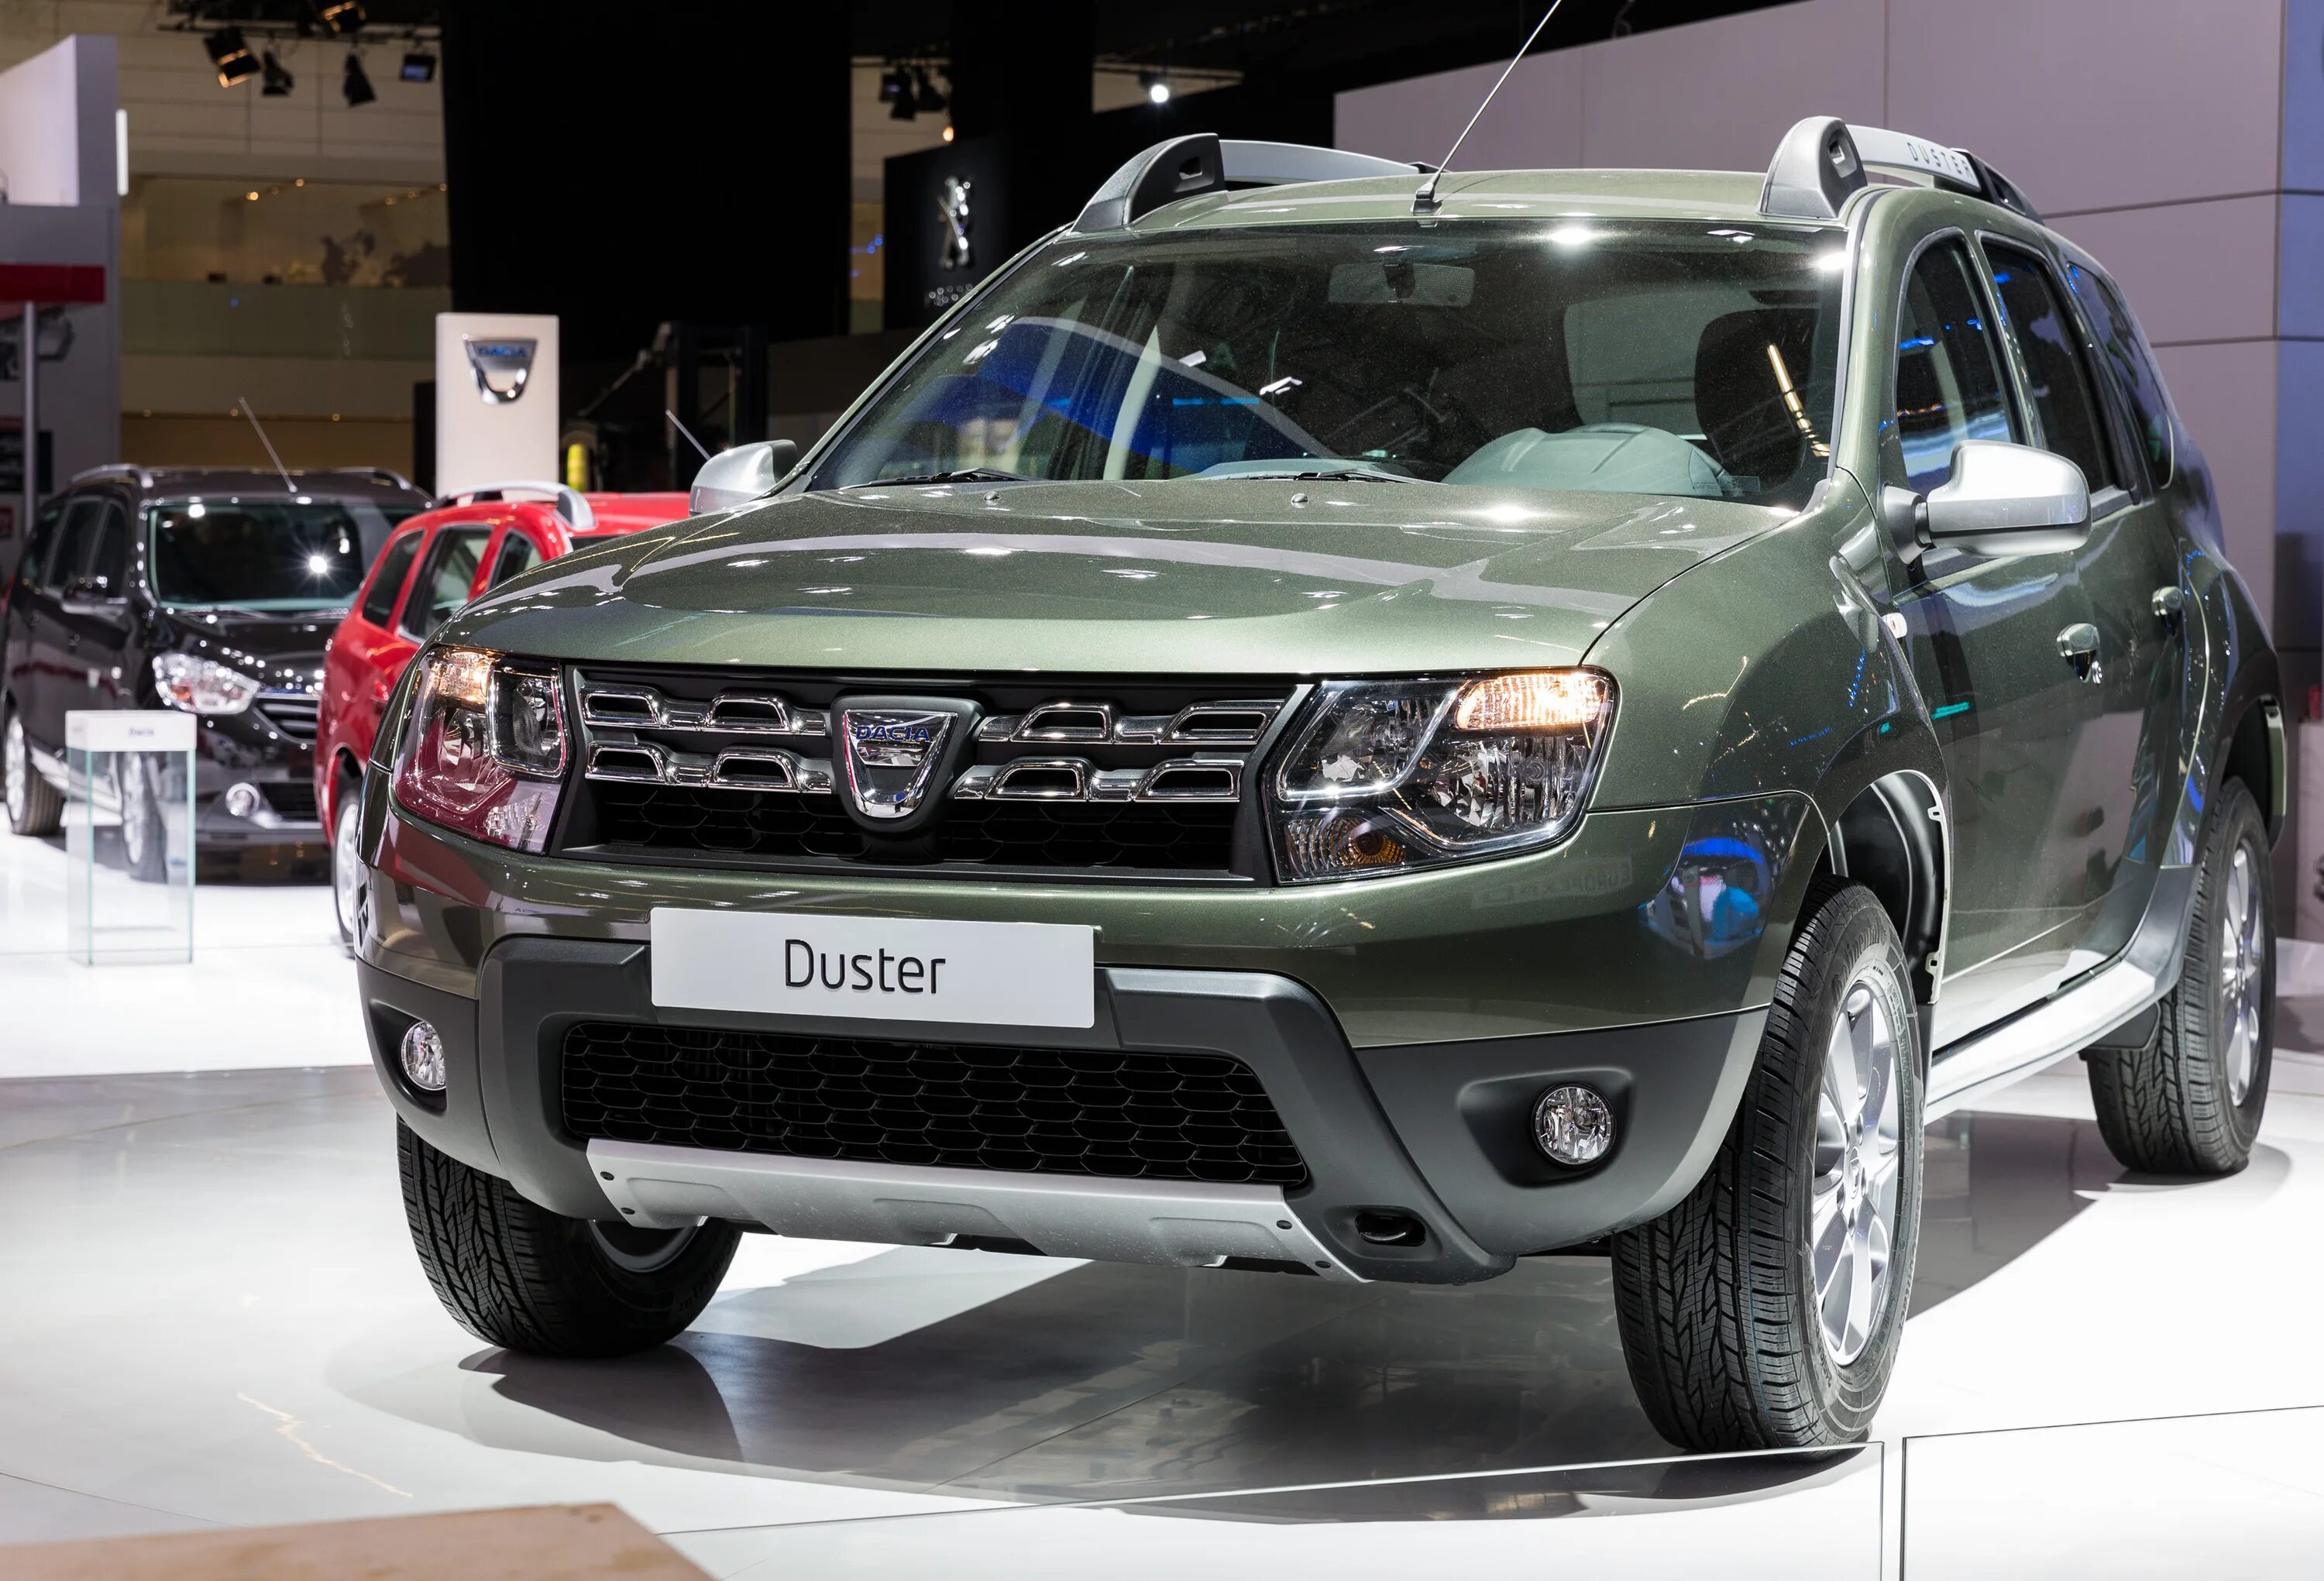 Renault Duster 2014. Рено Дастер 2. Рено Дастер 2014. Ренаулт Дастер 2.